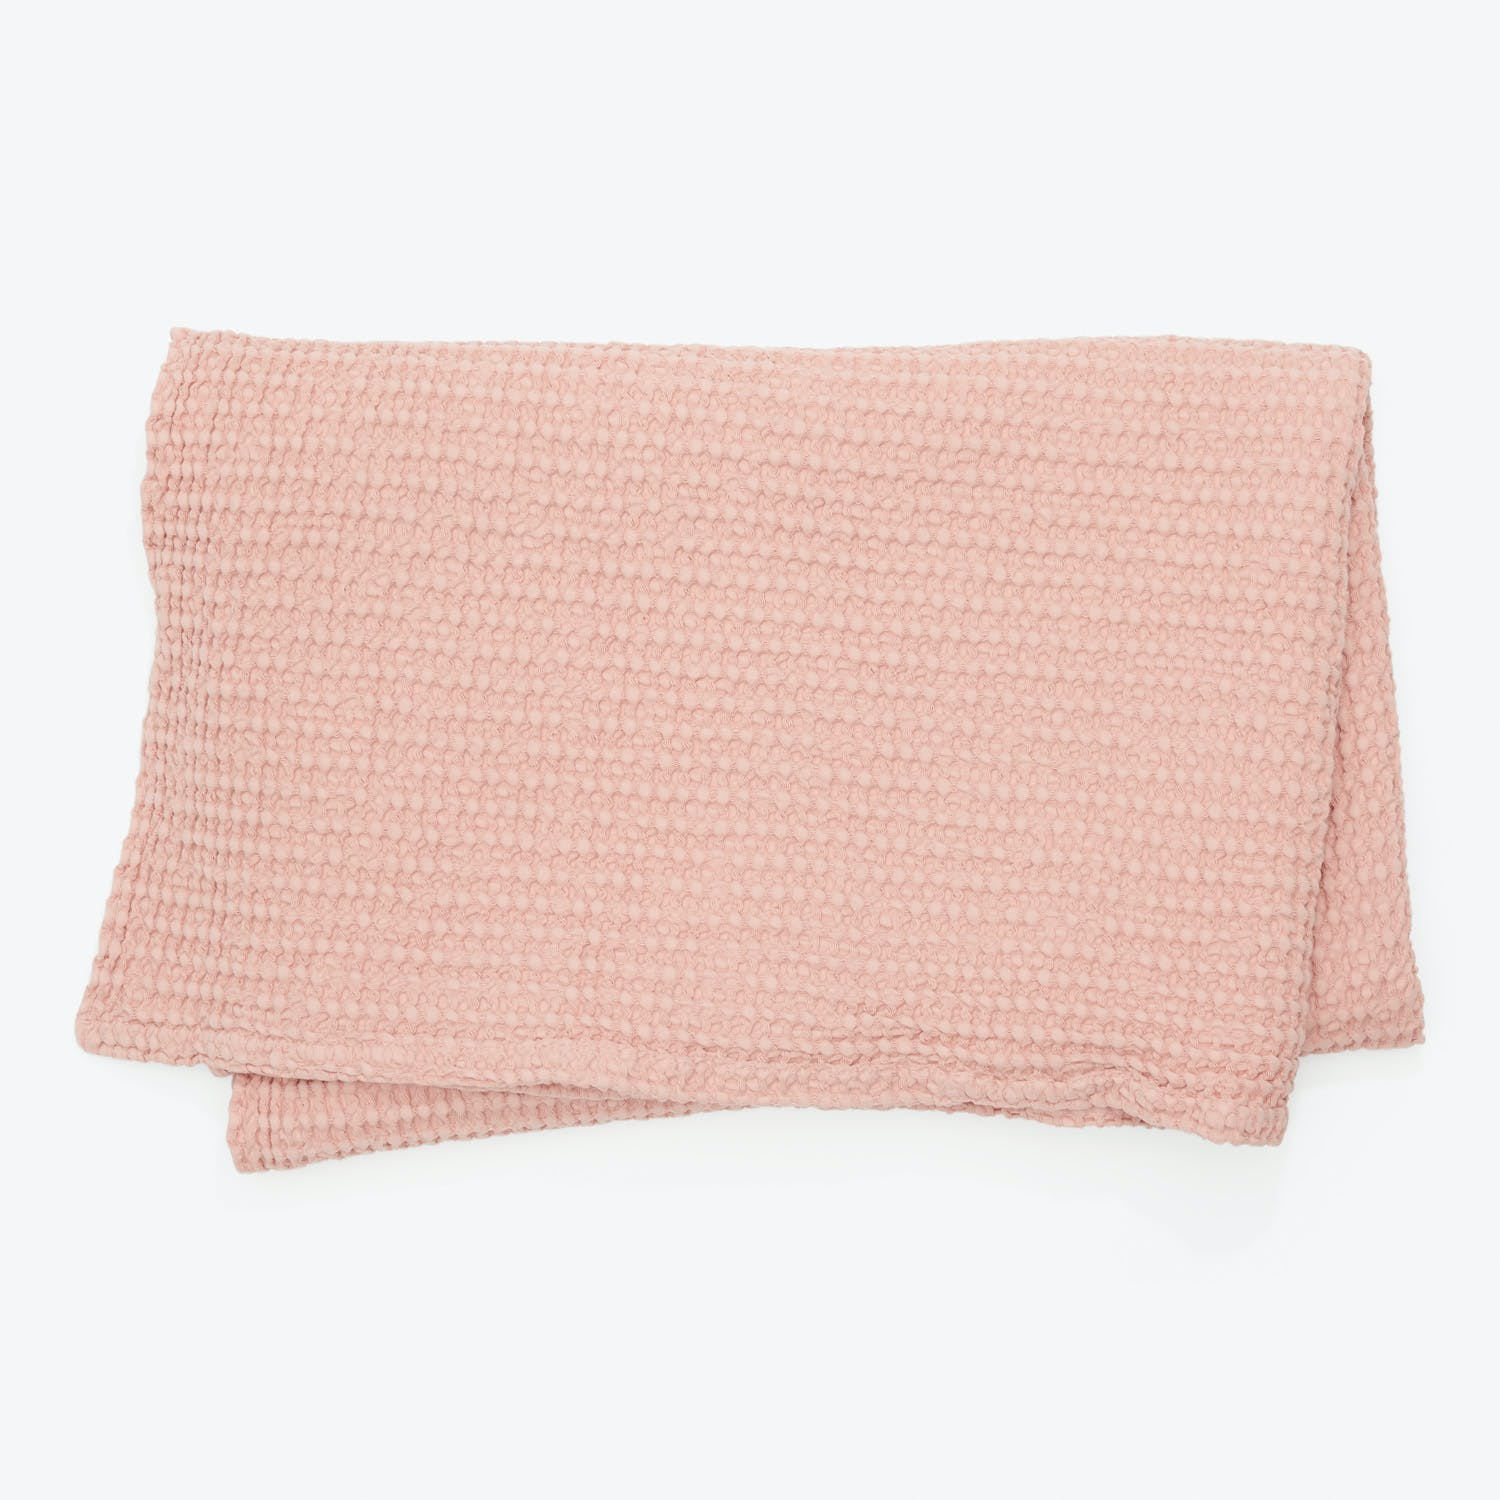 Folded pink towel with textured surface against white background.